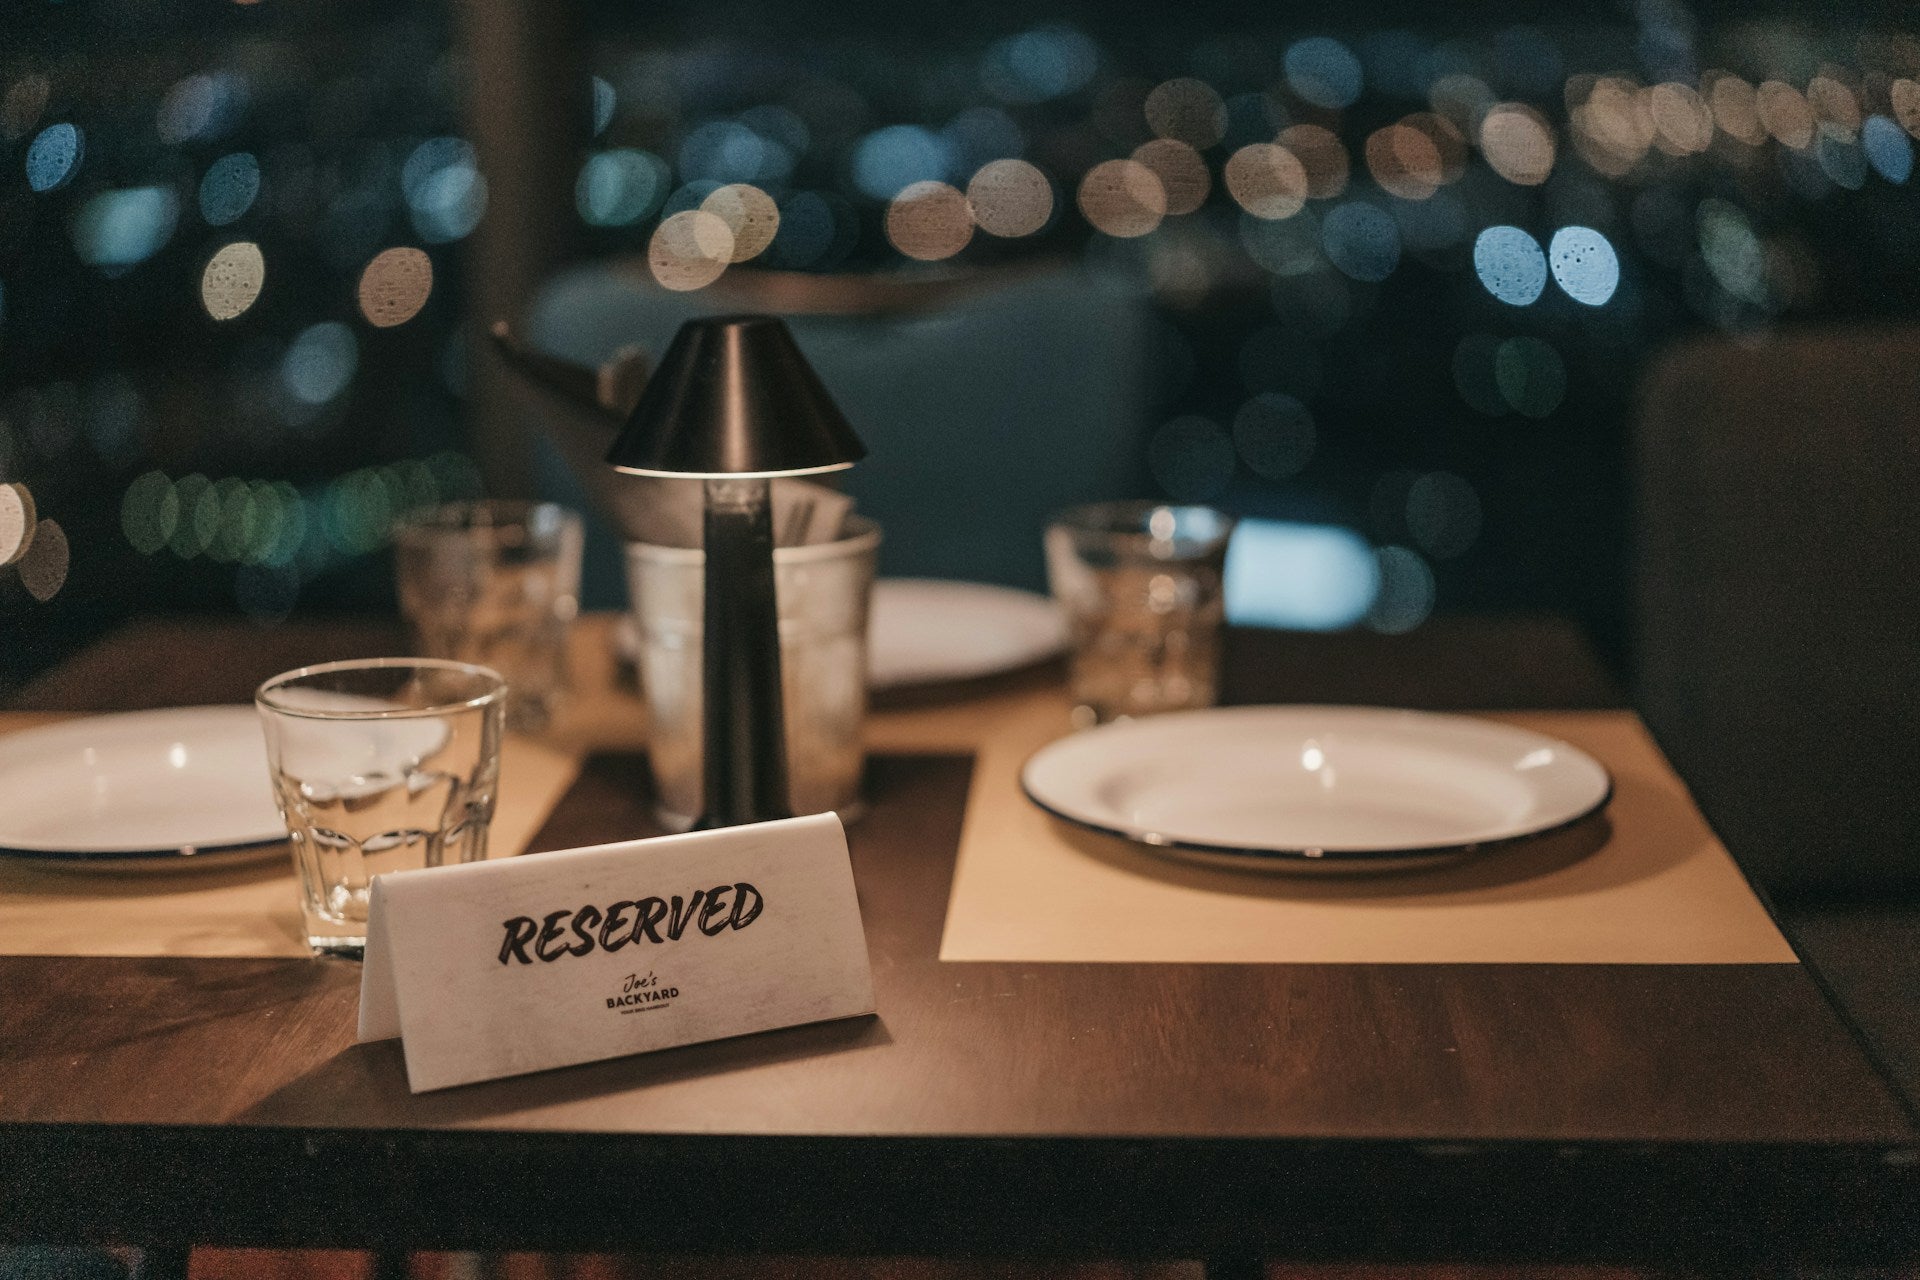 A table set for two with simple white dishes and a bottle of wine. A sign reads "Reserved."